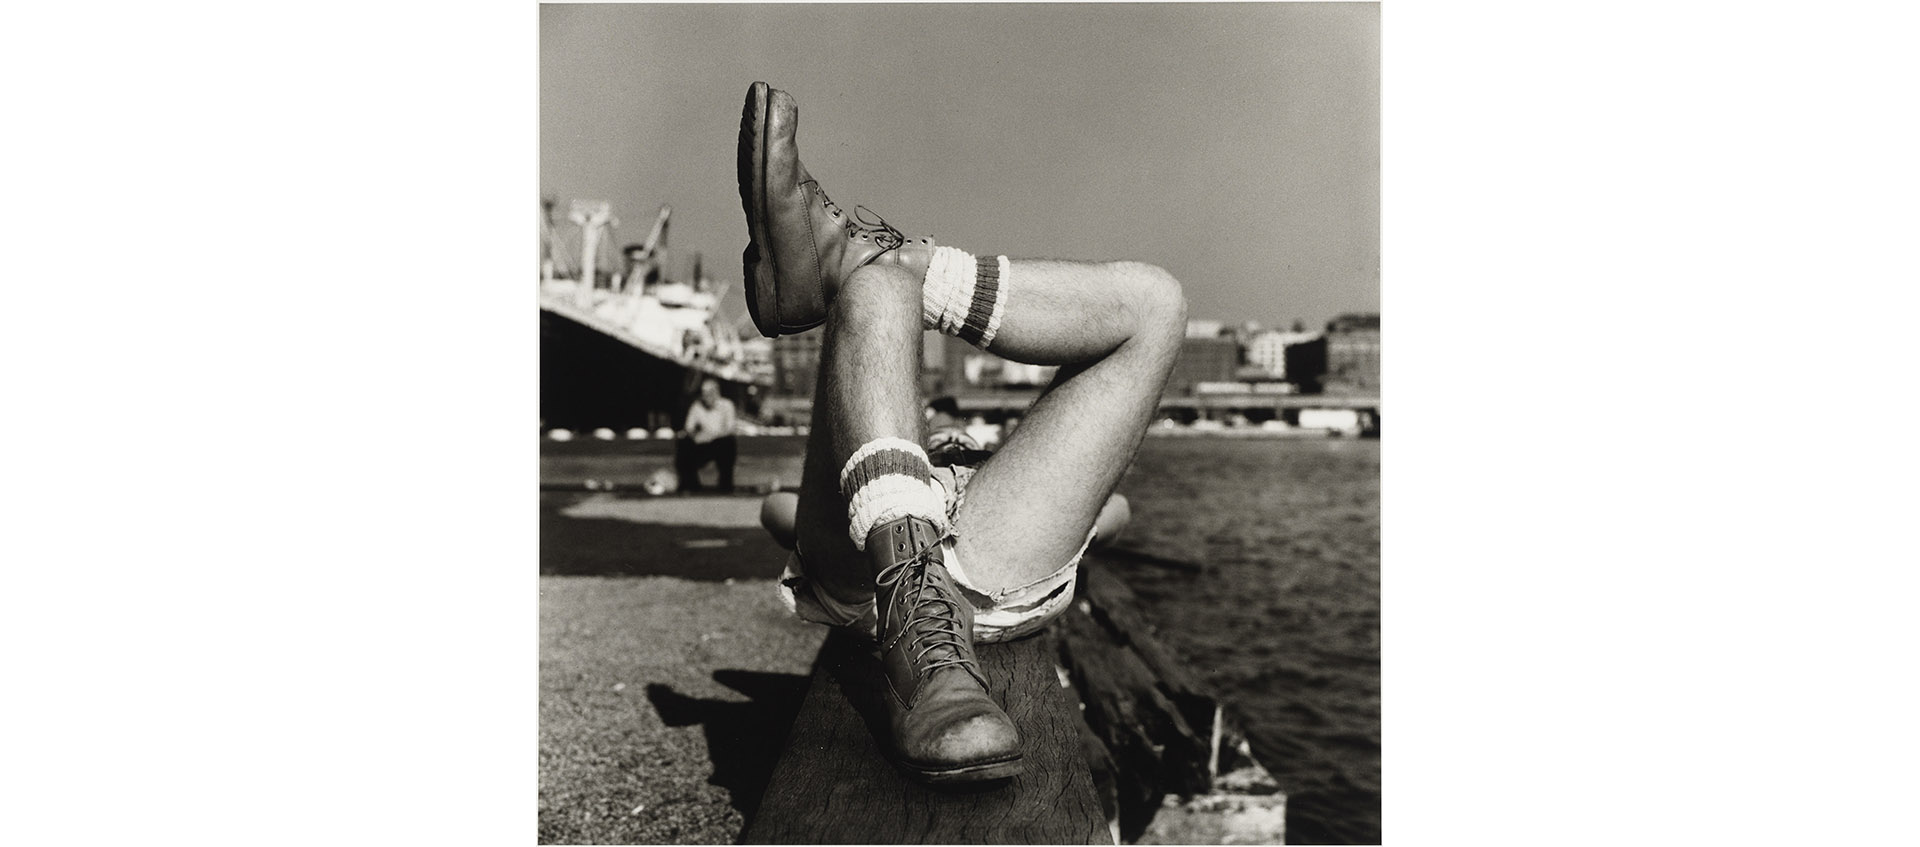 A 1976 Peter Hujar photograph of a man's legs in shorts and boots, crossed and lying down on a pier, entitled "Christopher Street Pier (2)"